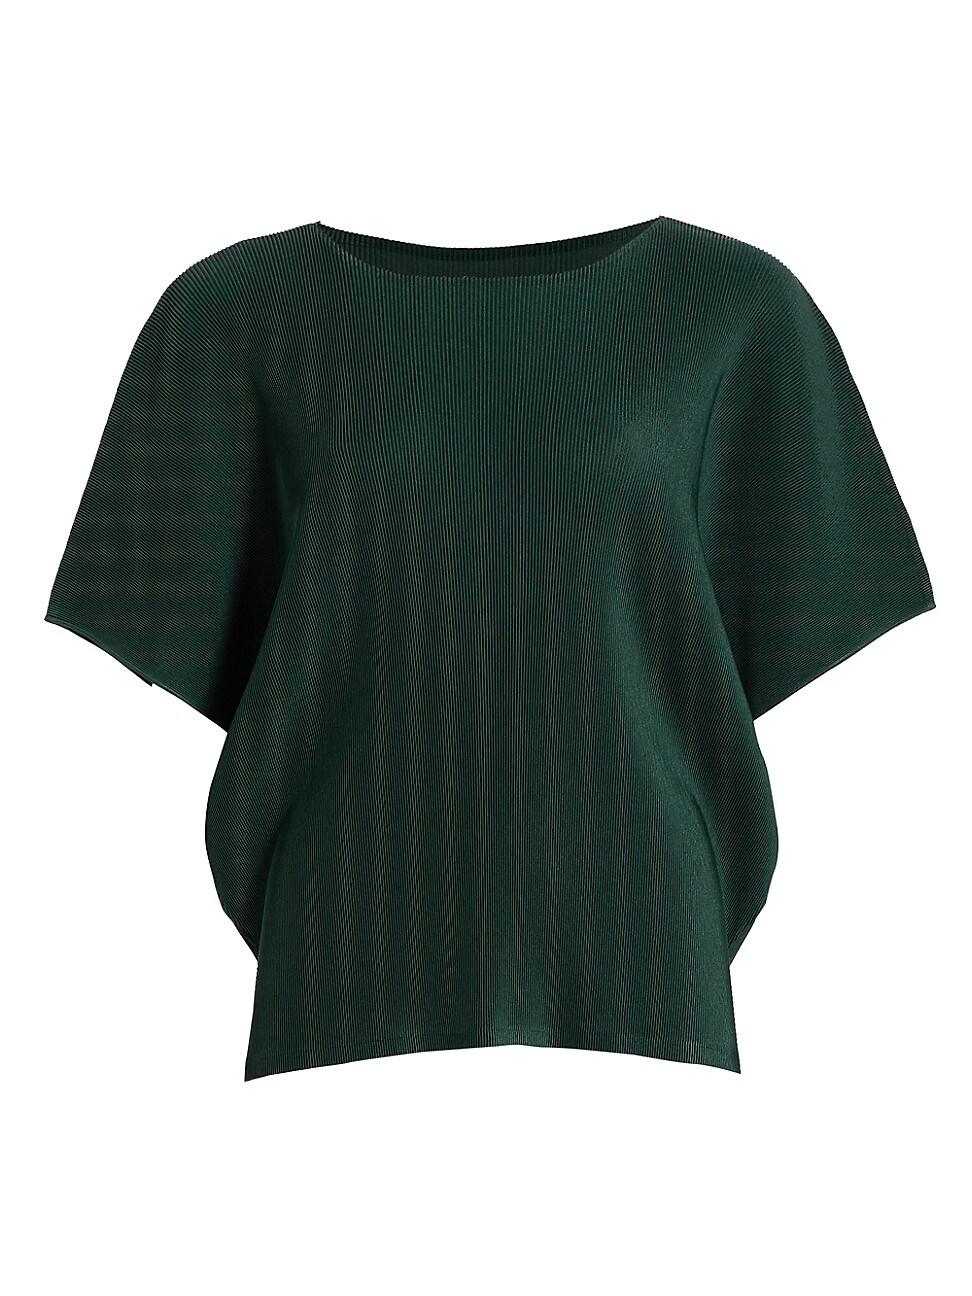 Pleats Please Issey Miyake Mist August Pleated Top in Green | Lyst